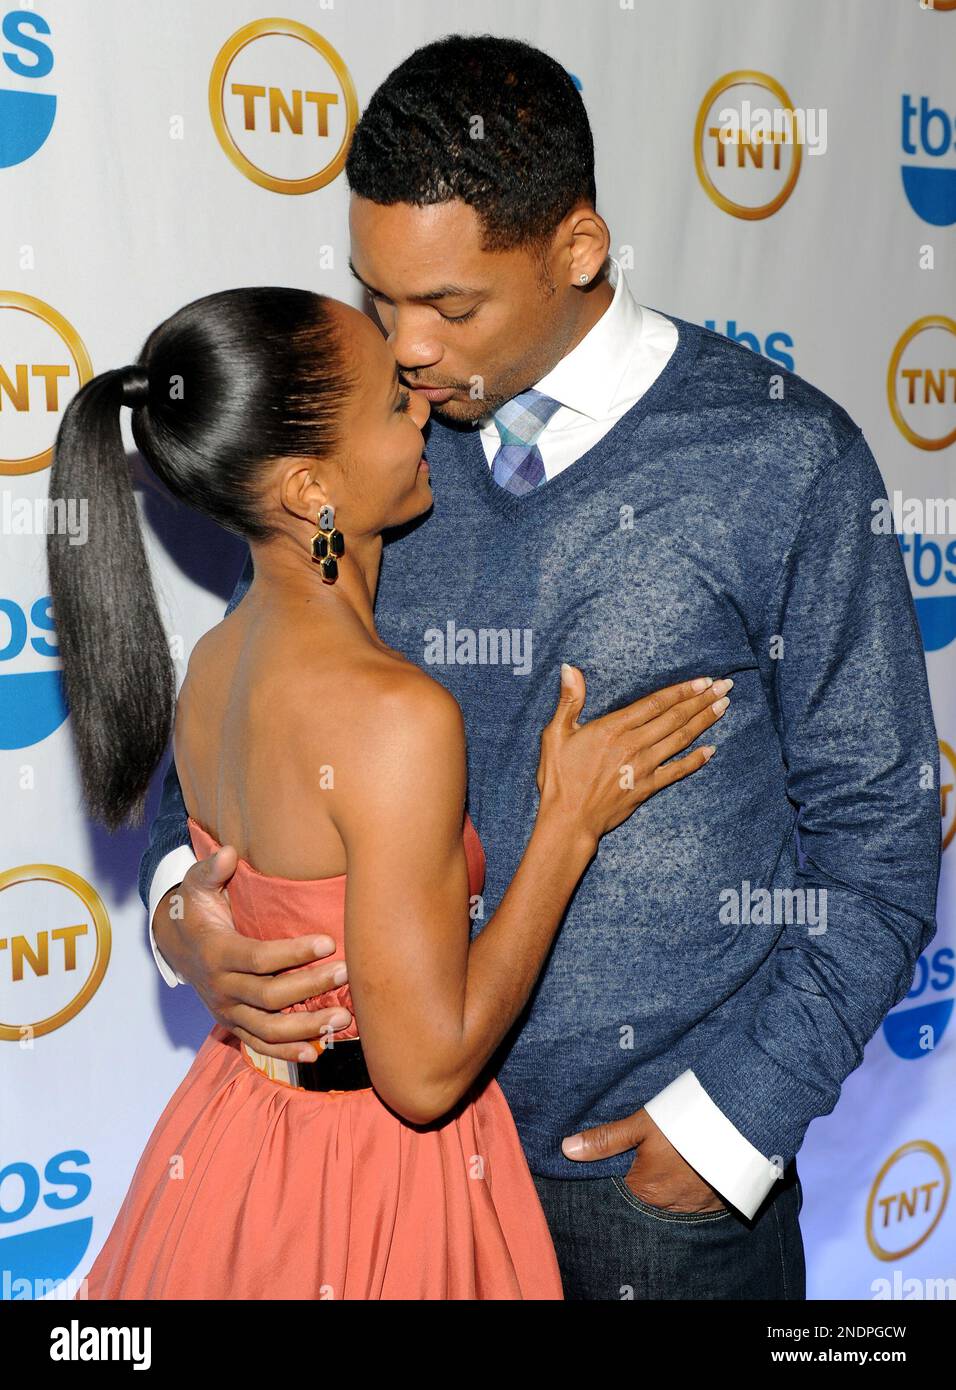 Actress Jada Pinkett Smith from the cast of HawthoRNe and husband actor Will Smith attend the TNT and TBS Upfront presentation at the Hammerstein Ballroom on Wednesday, May 19, 2010 in picture